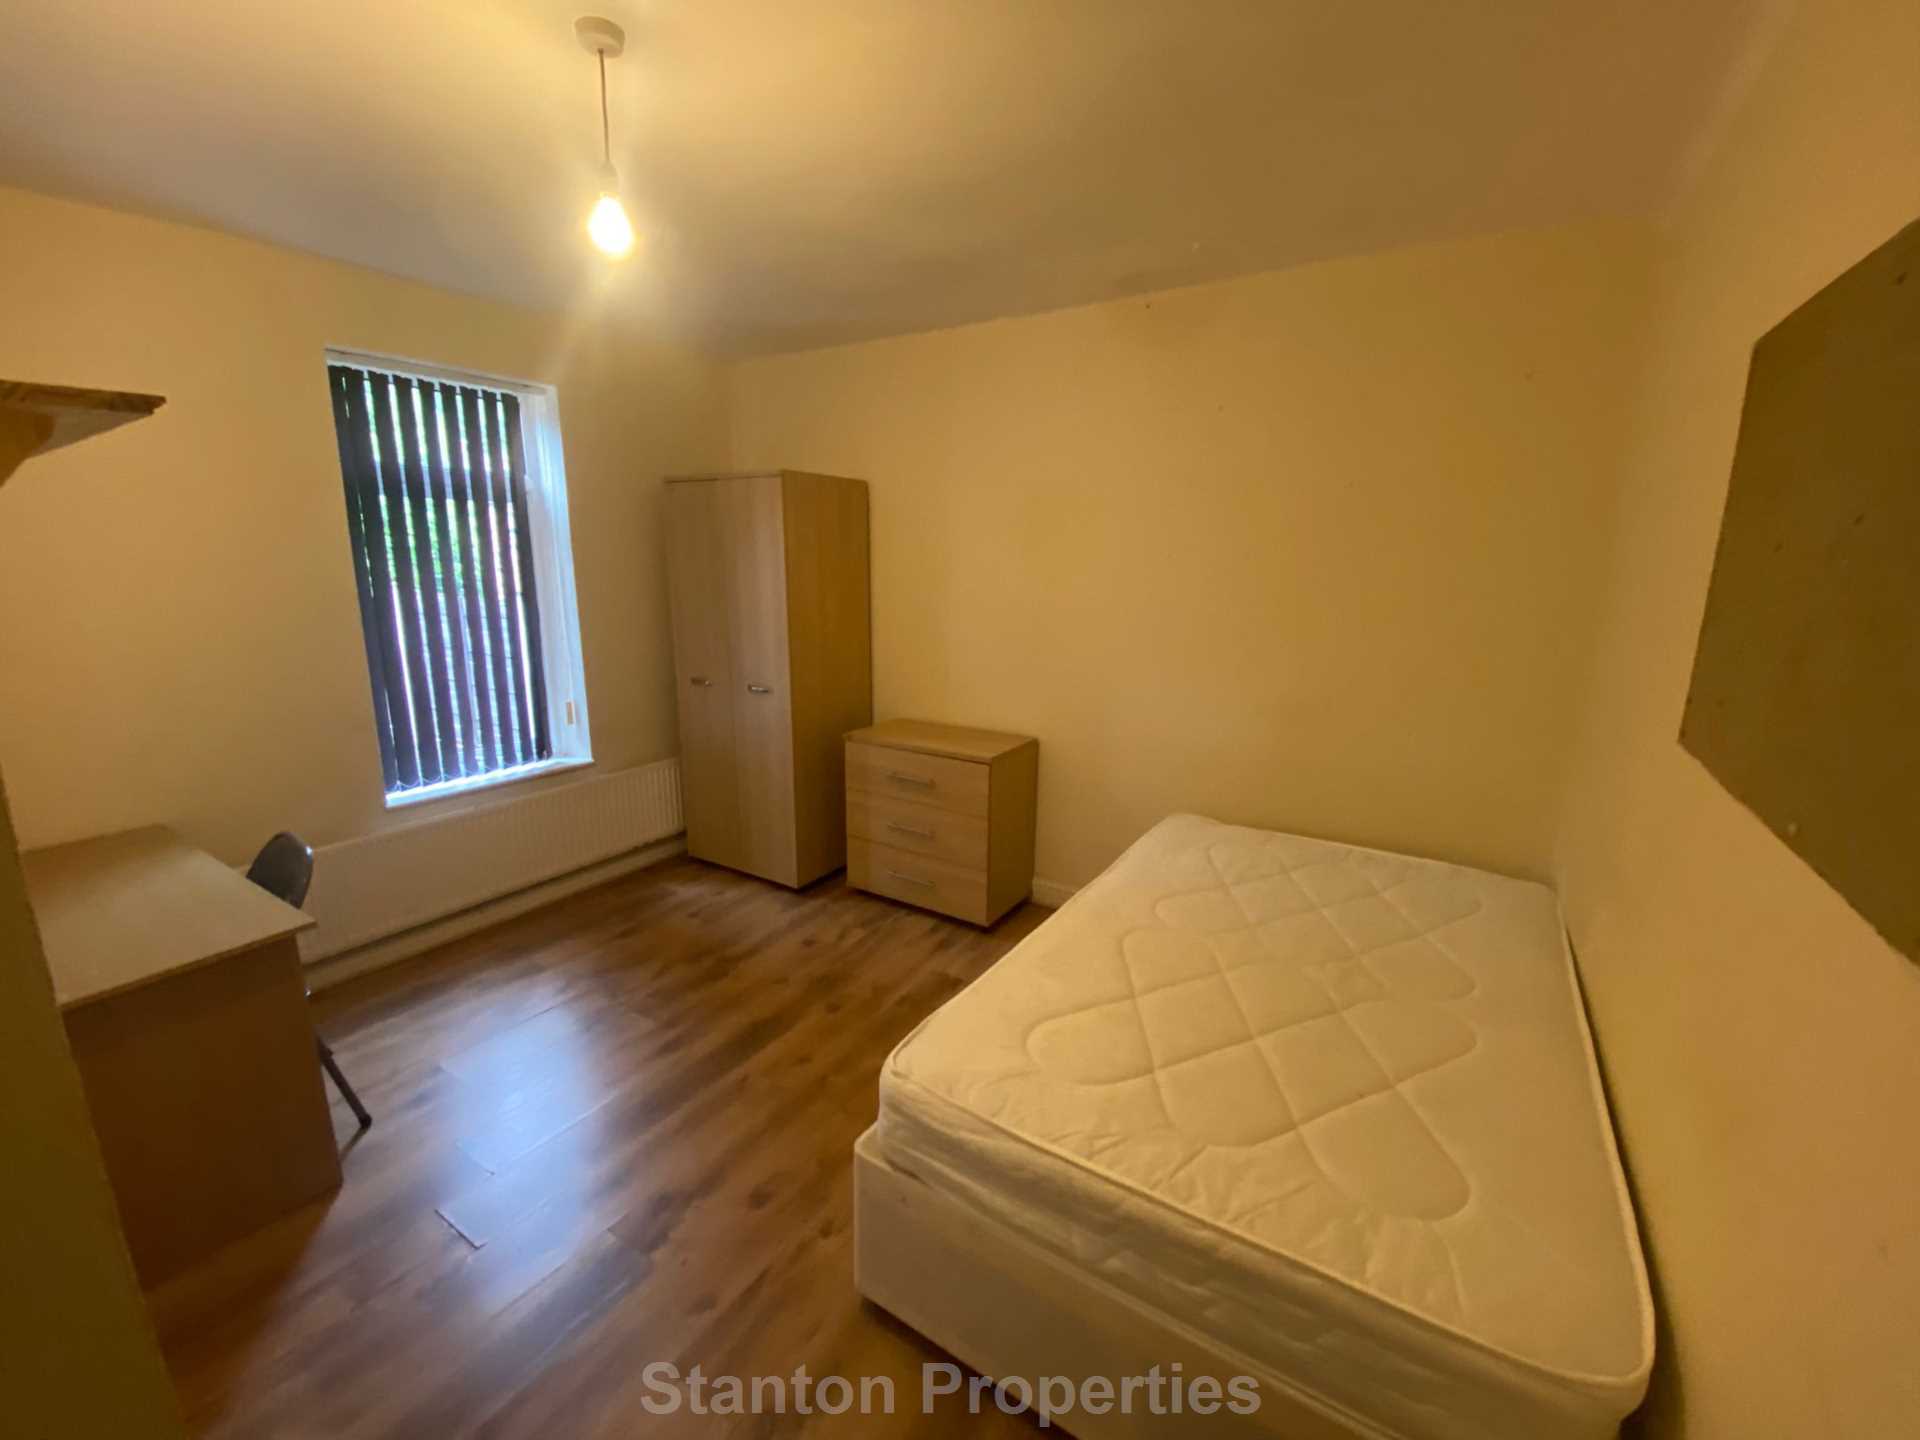 £120 pppw, Weld Road, Withington, Image 7